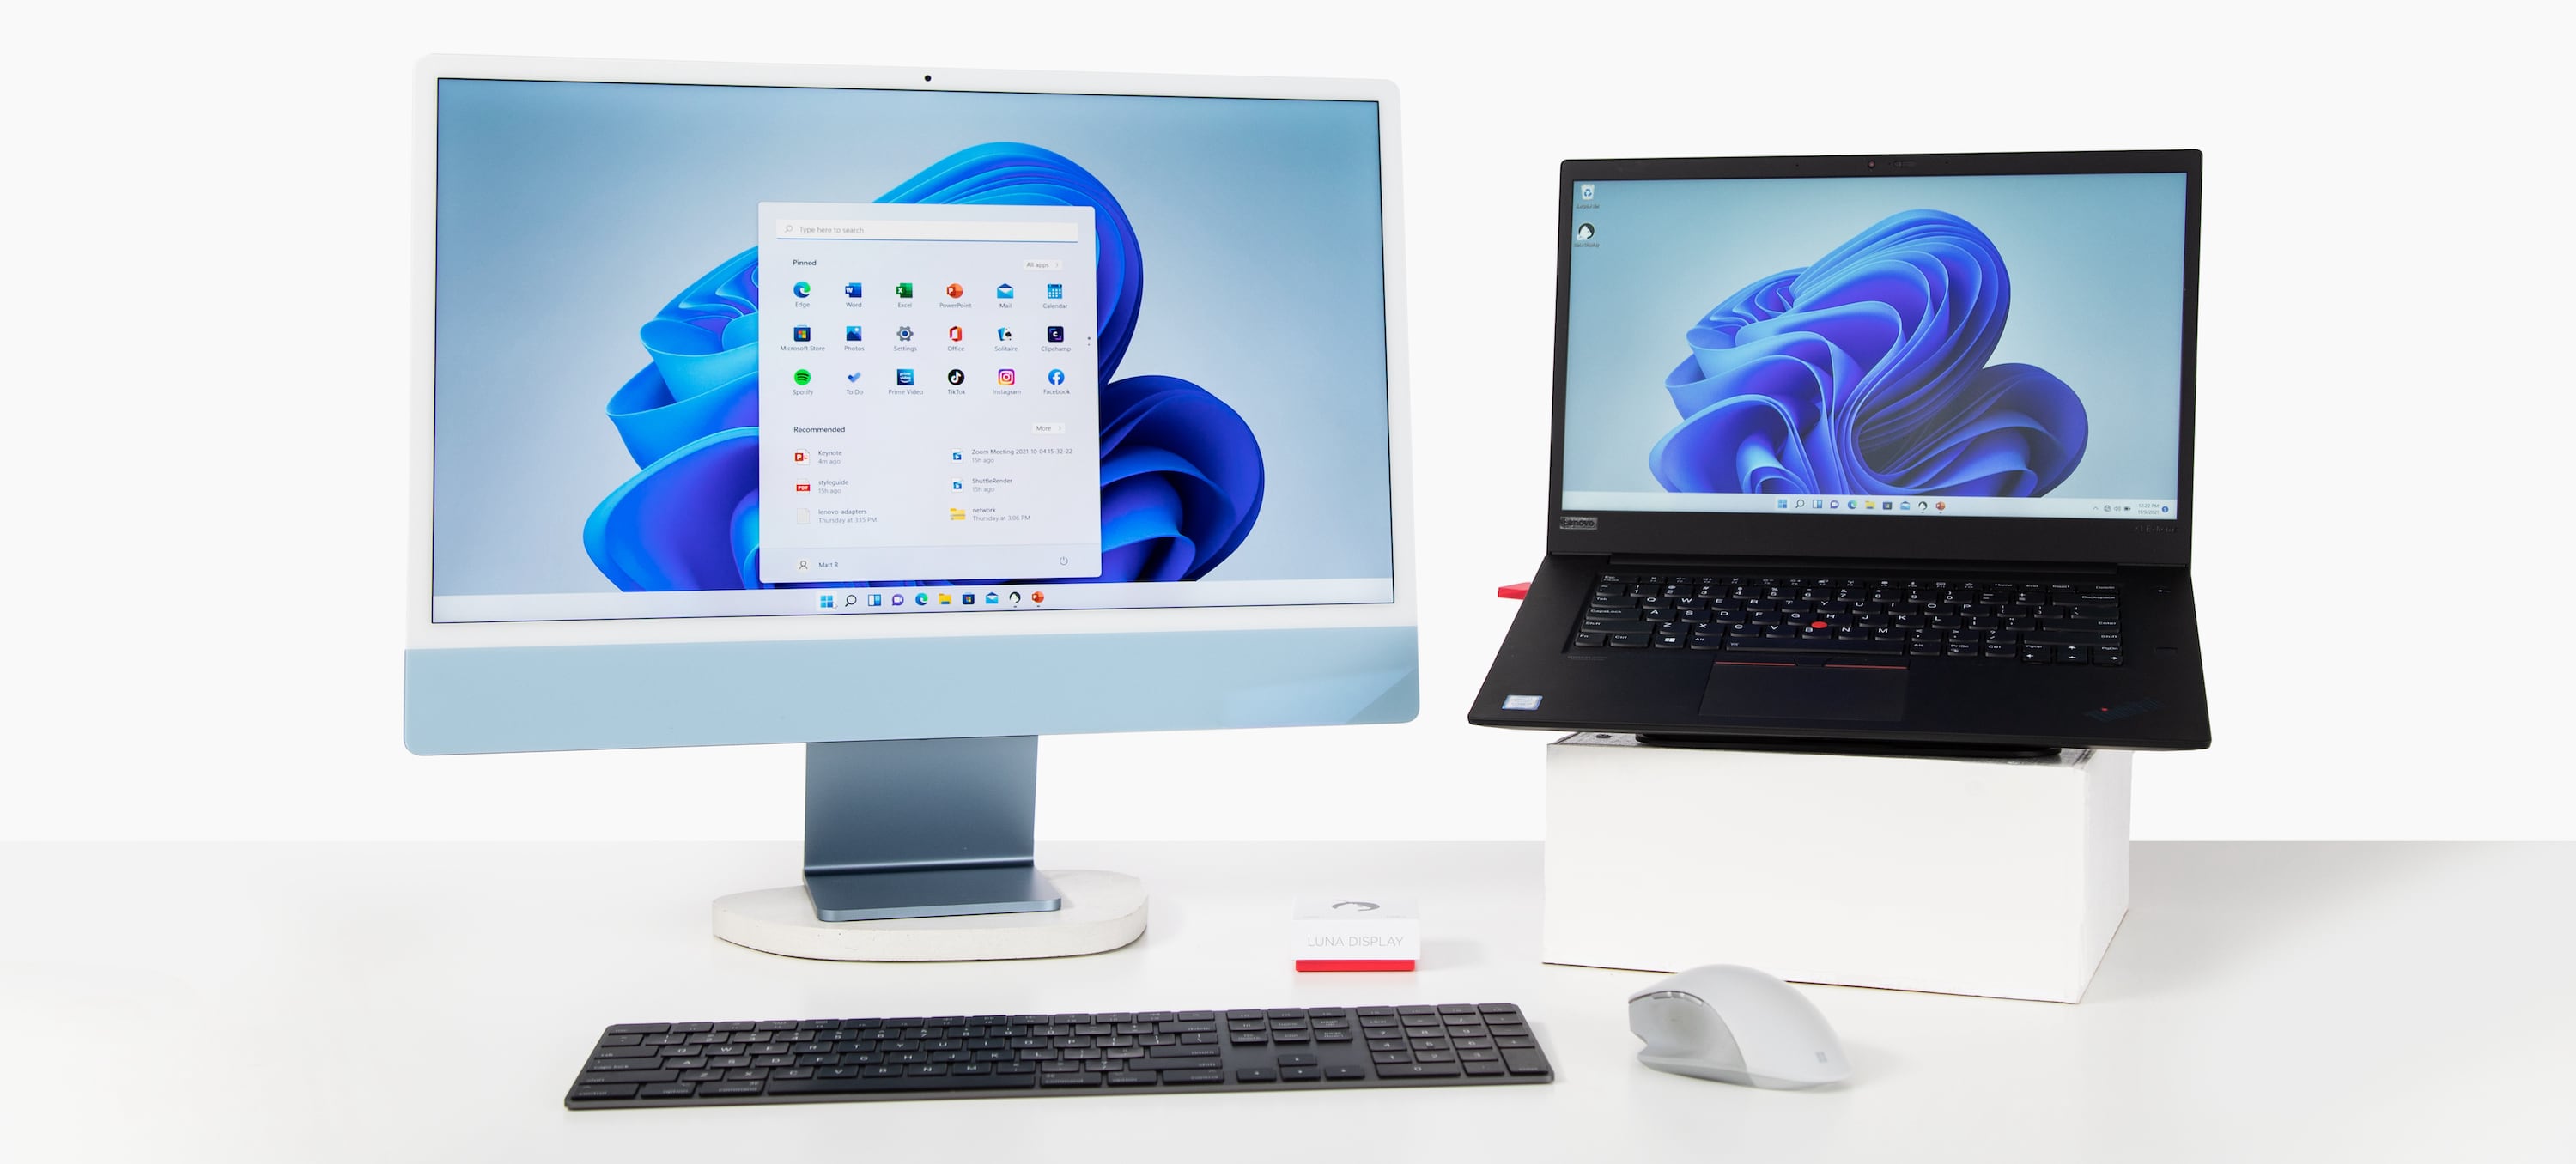 Marketing image showing an iMac acting as a secondary wireless display for Lenovo's Windows PC laptop via the Luna Display USB-C dongle